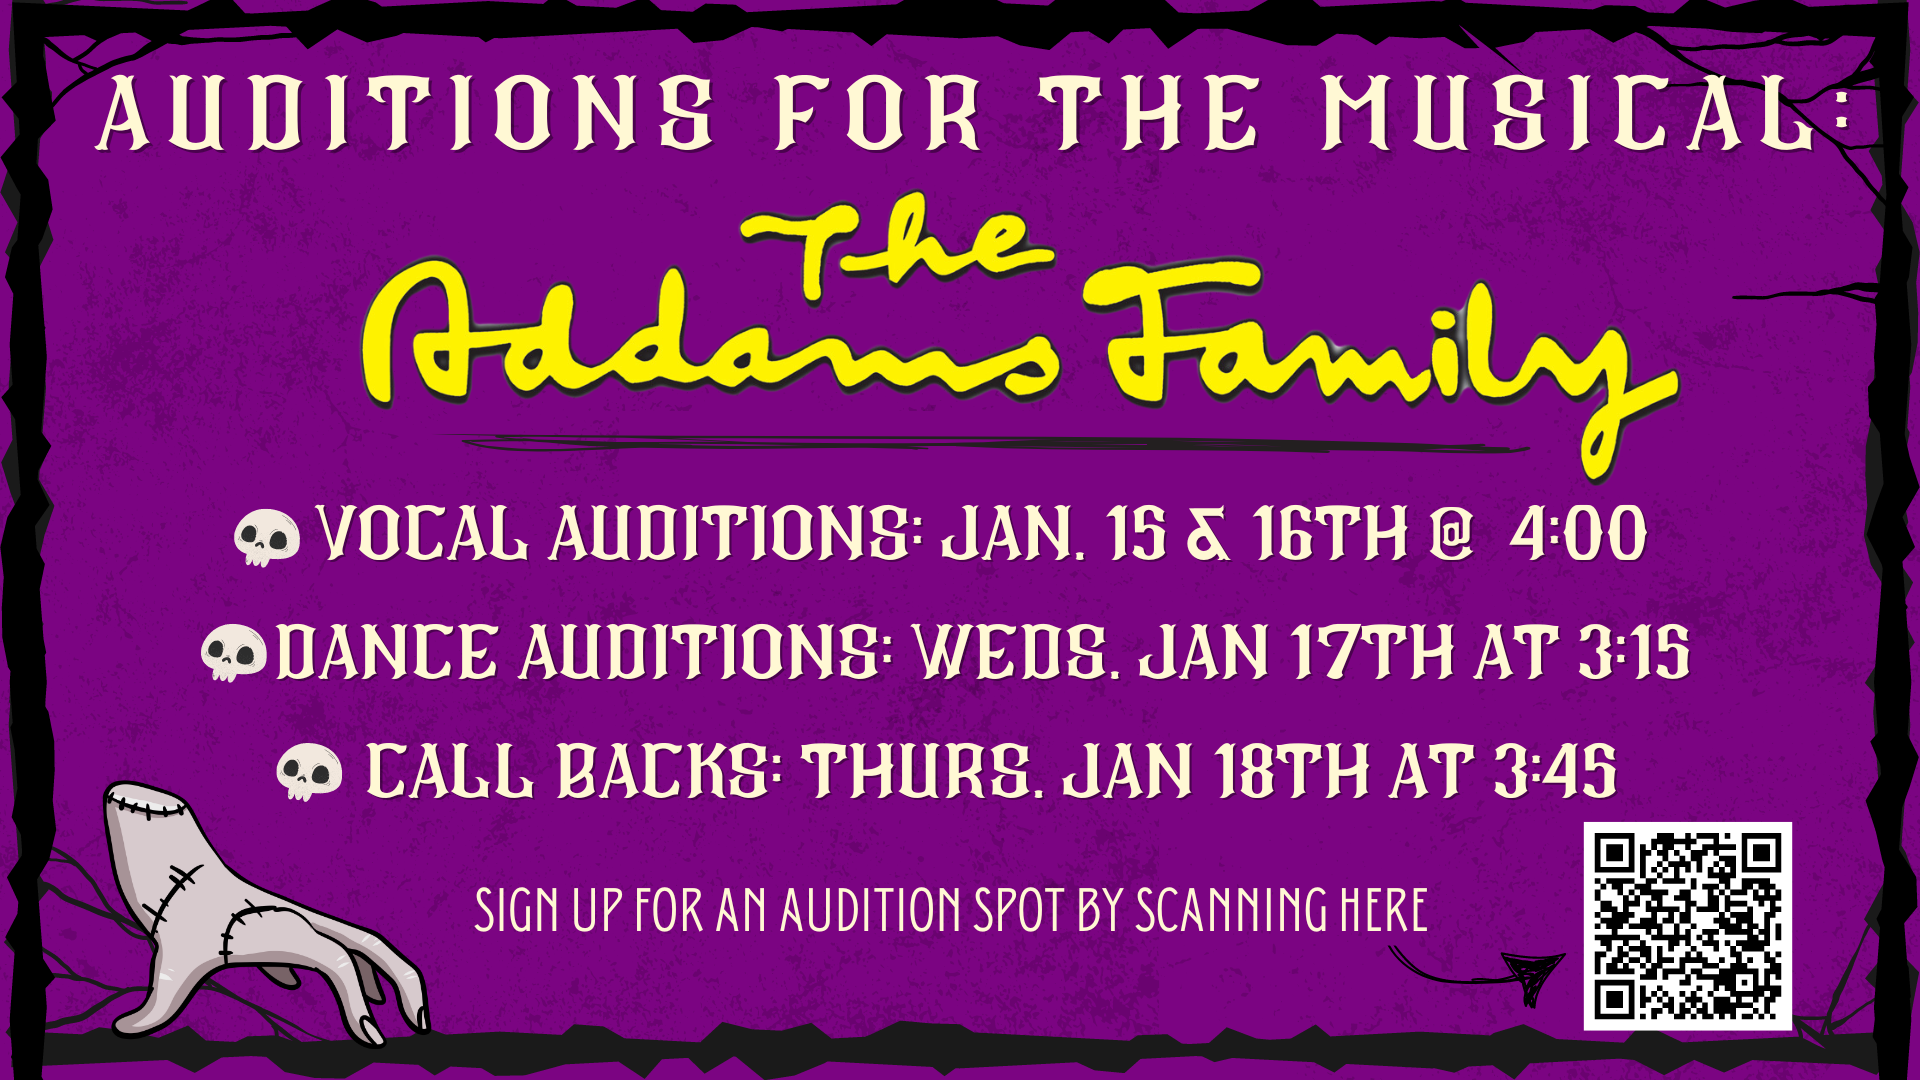 Musical Auditions